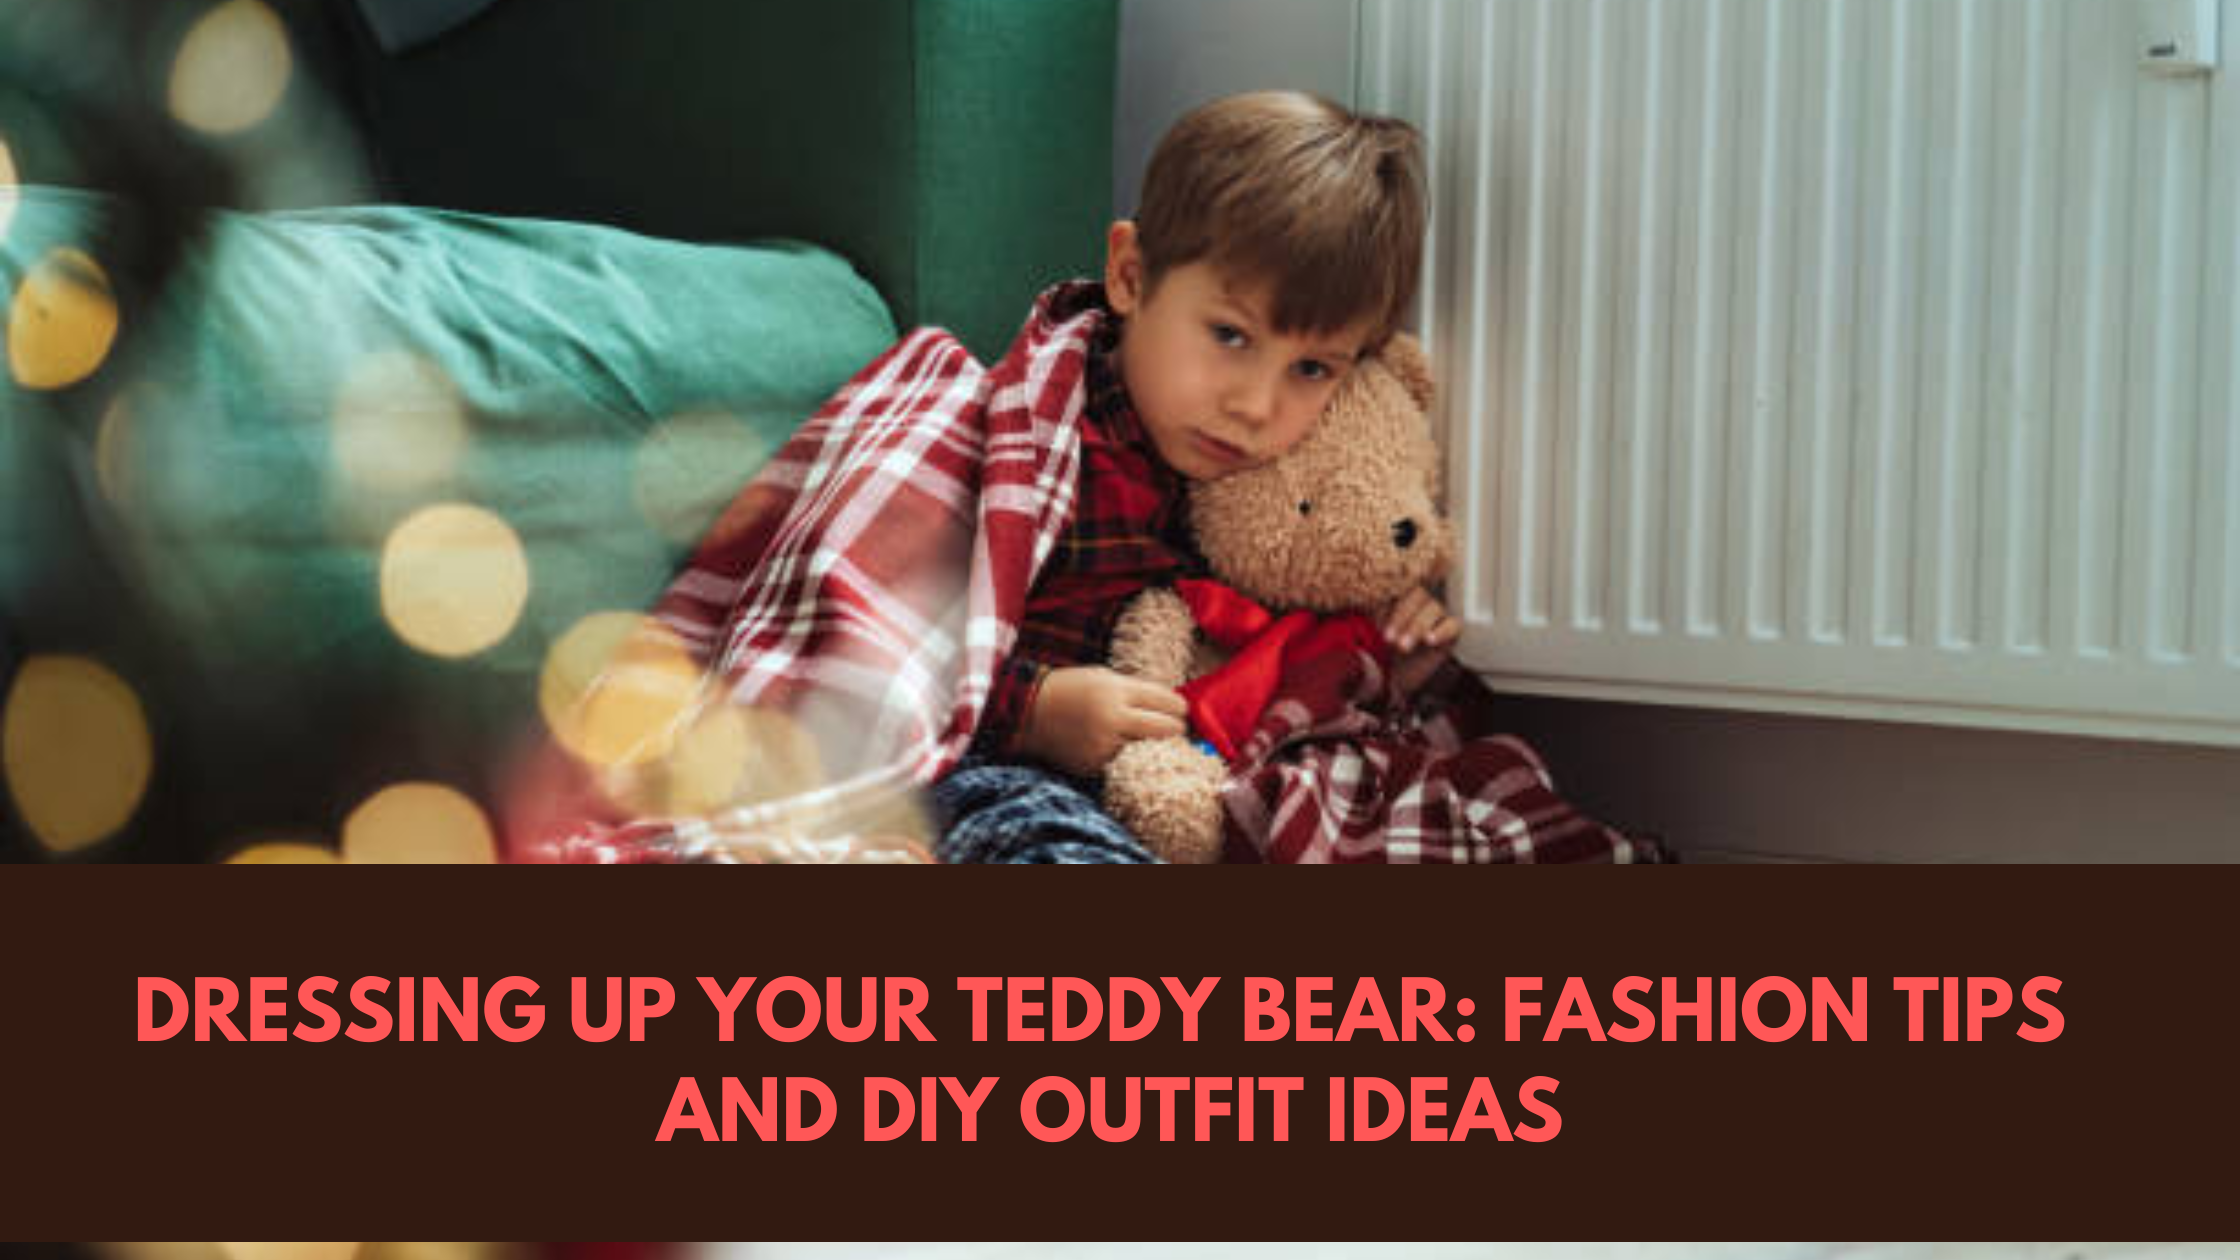 Dressing Up Your Teddy Bear: Fashion Tips and DIY Outfit Ideas